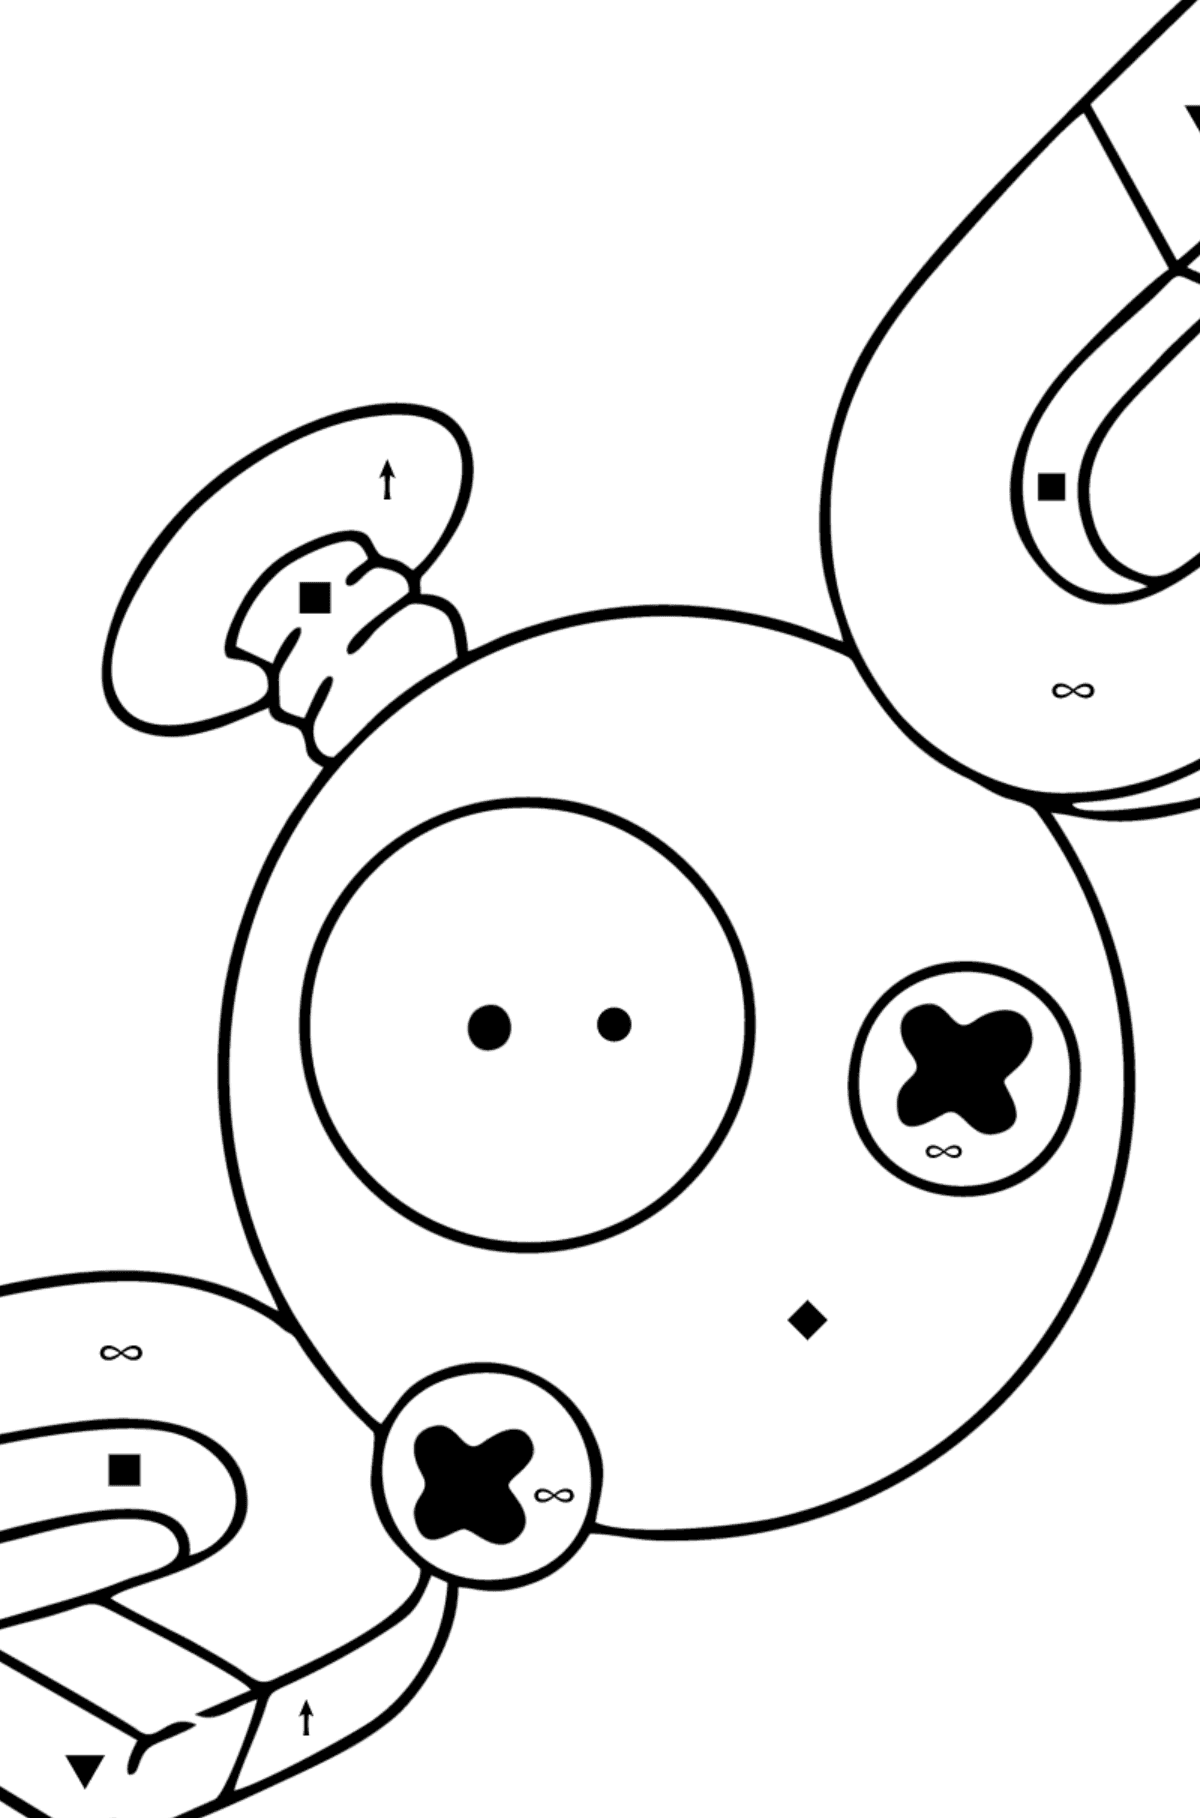 Coloring page Pokémon Go Magnemite - Coloring by Symbols for Kids